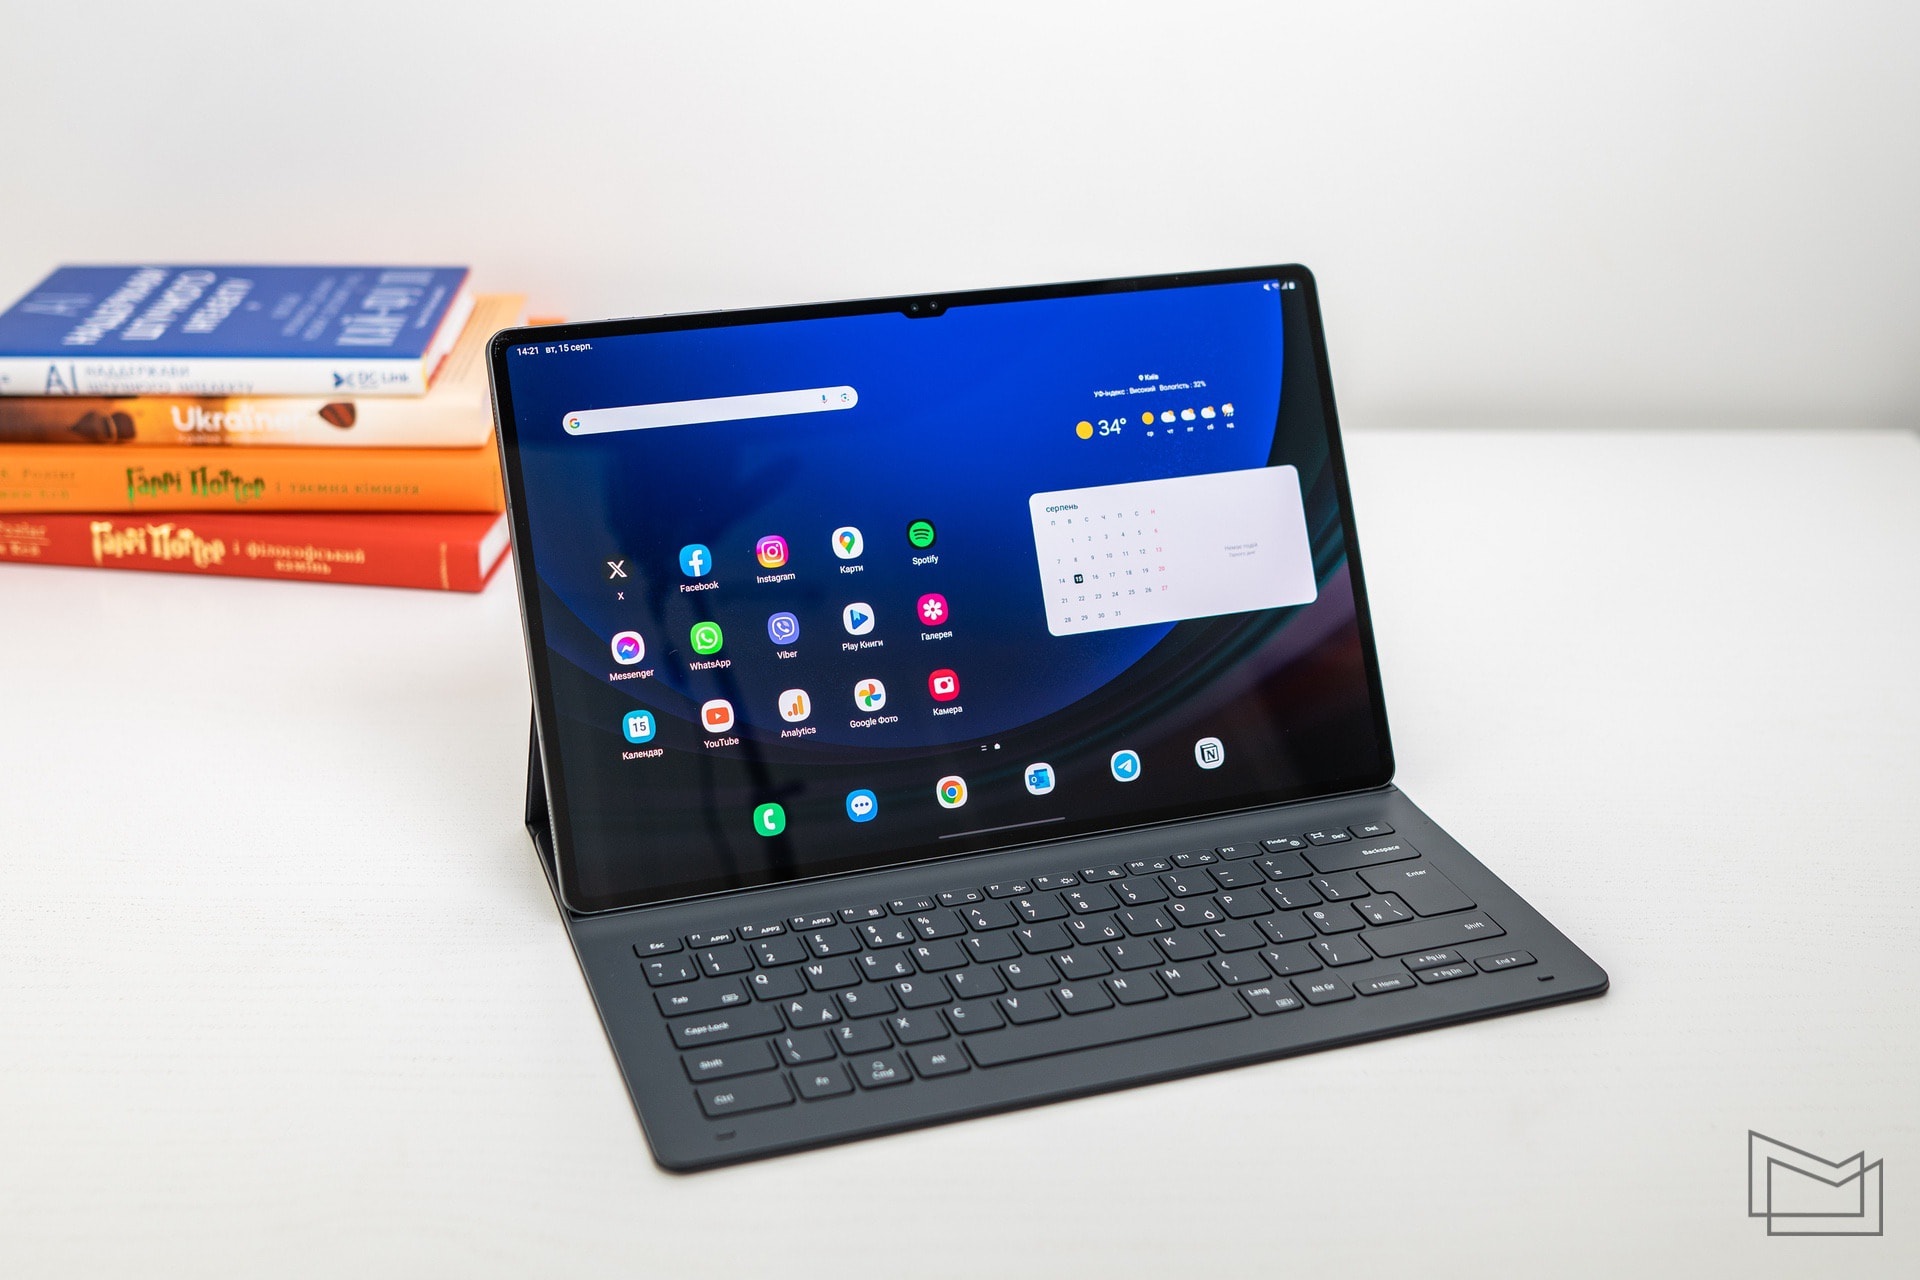 Samsung Tab S9 Ultra Hands-on: A Tablet Bigger Than Most Laptops